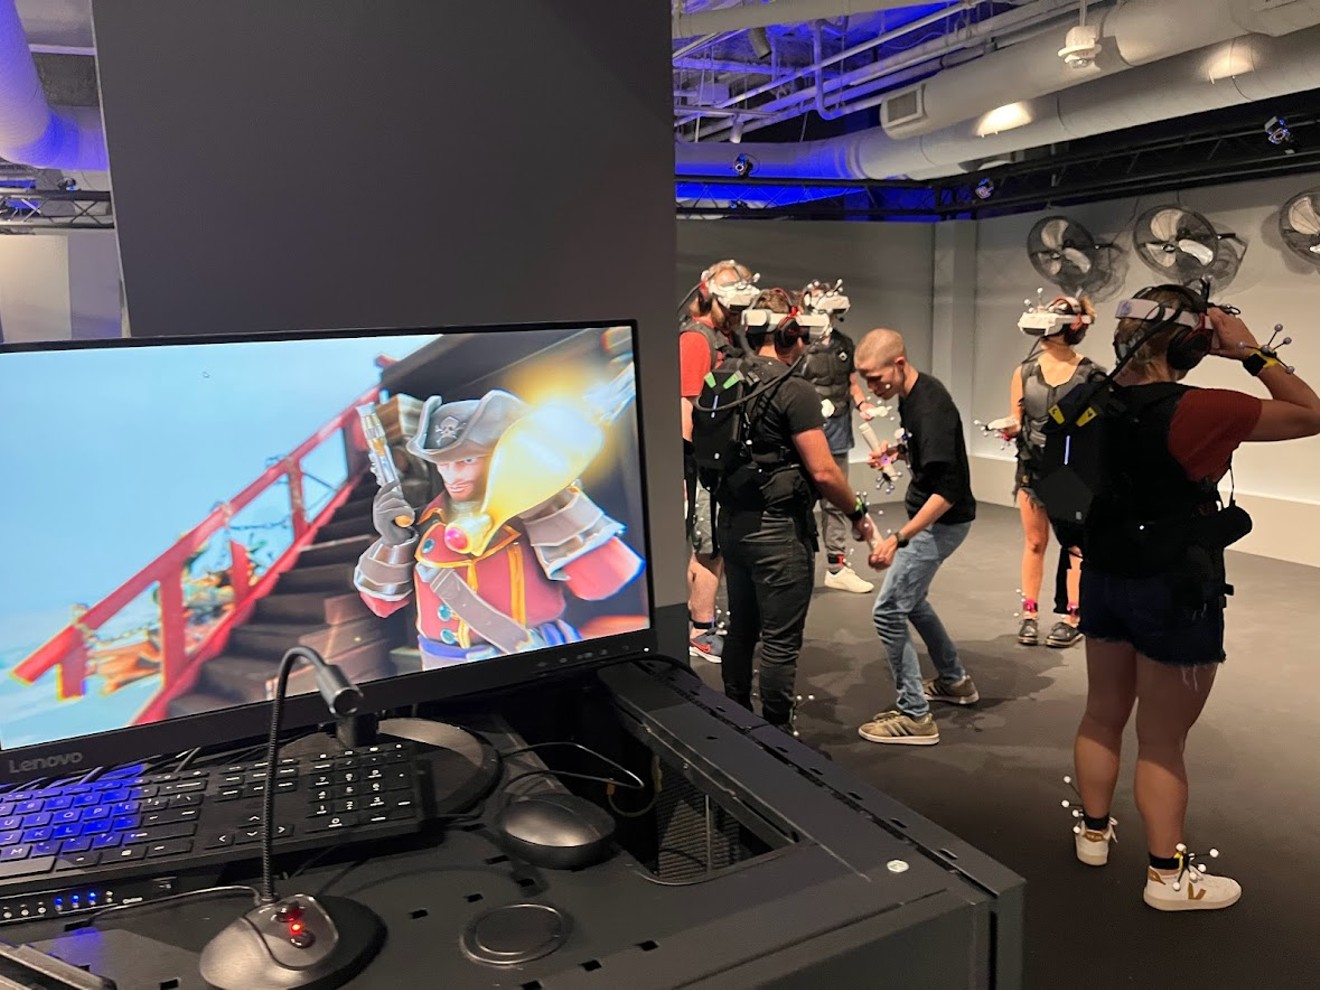 A group of players gear up for a fight with the ghost of Davy Jones in a round of Curse of Davy Jones, one of six virtual experiences at Sandbox VR in Mockingbird Station.